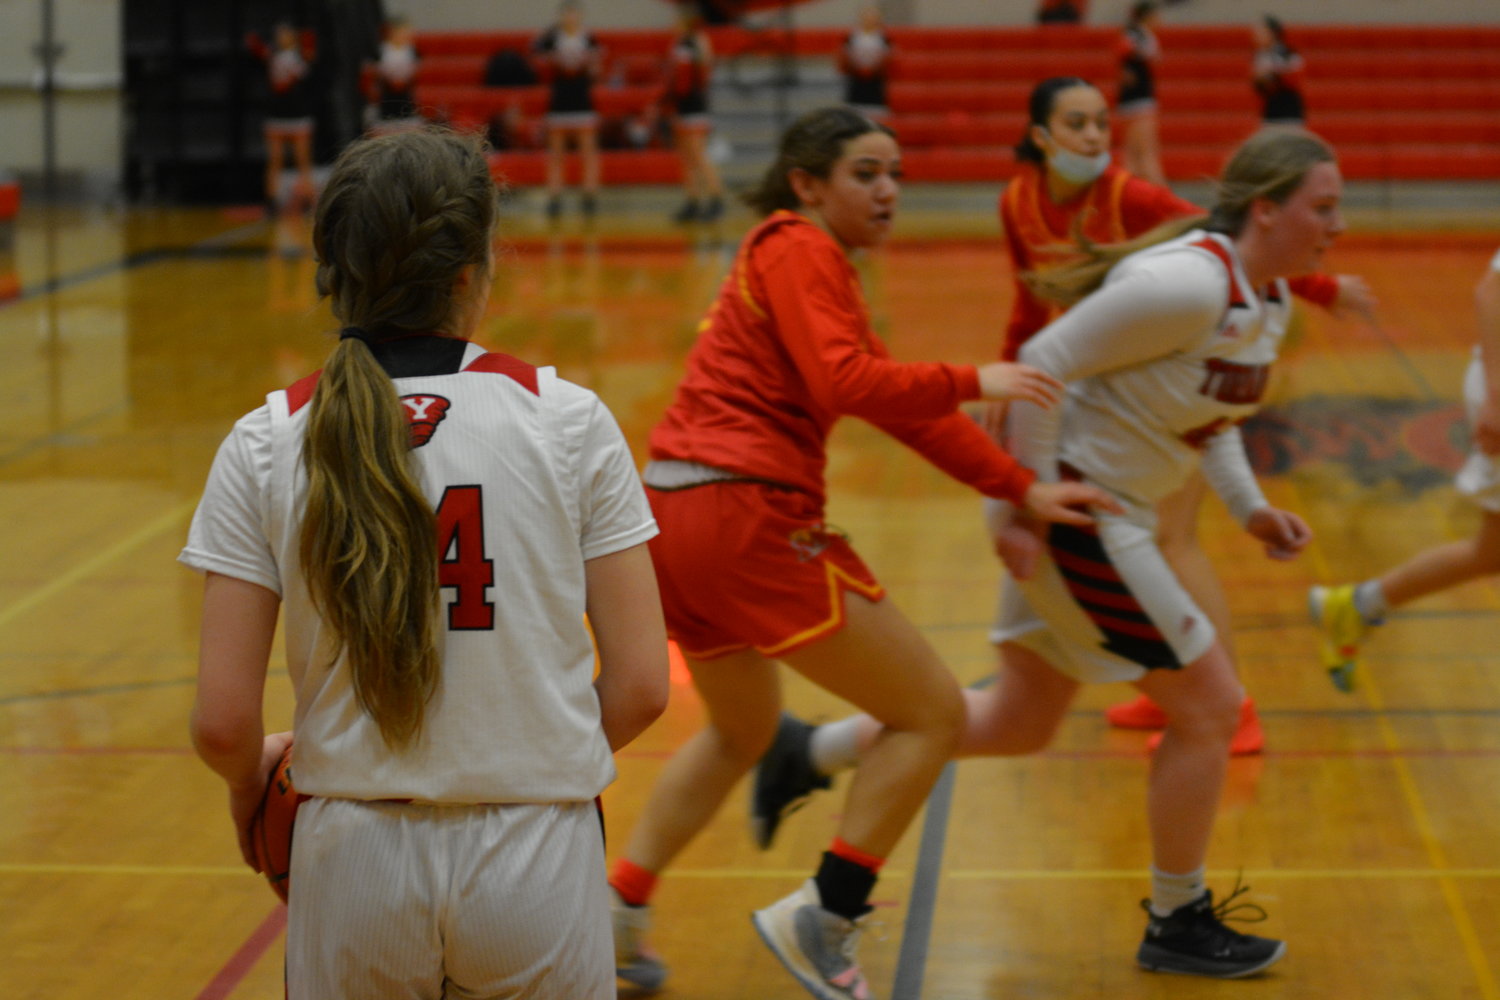 The Yelm girls basketball defeated Mount Tahoma on Friday, Feb. 11 at a home game.